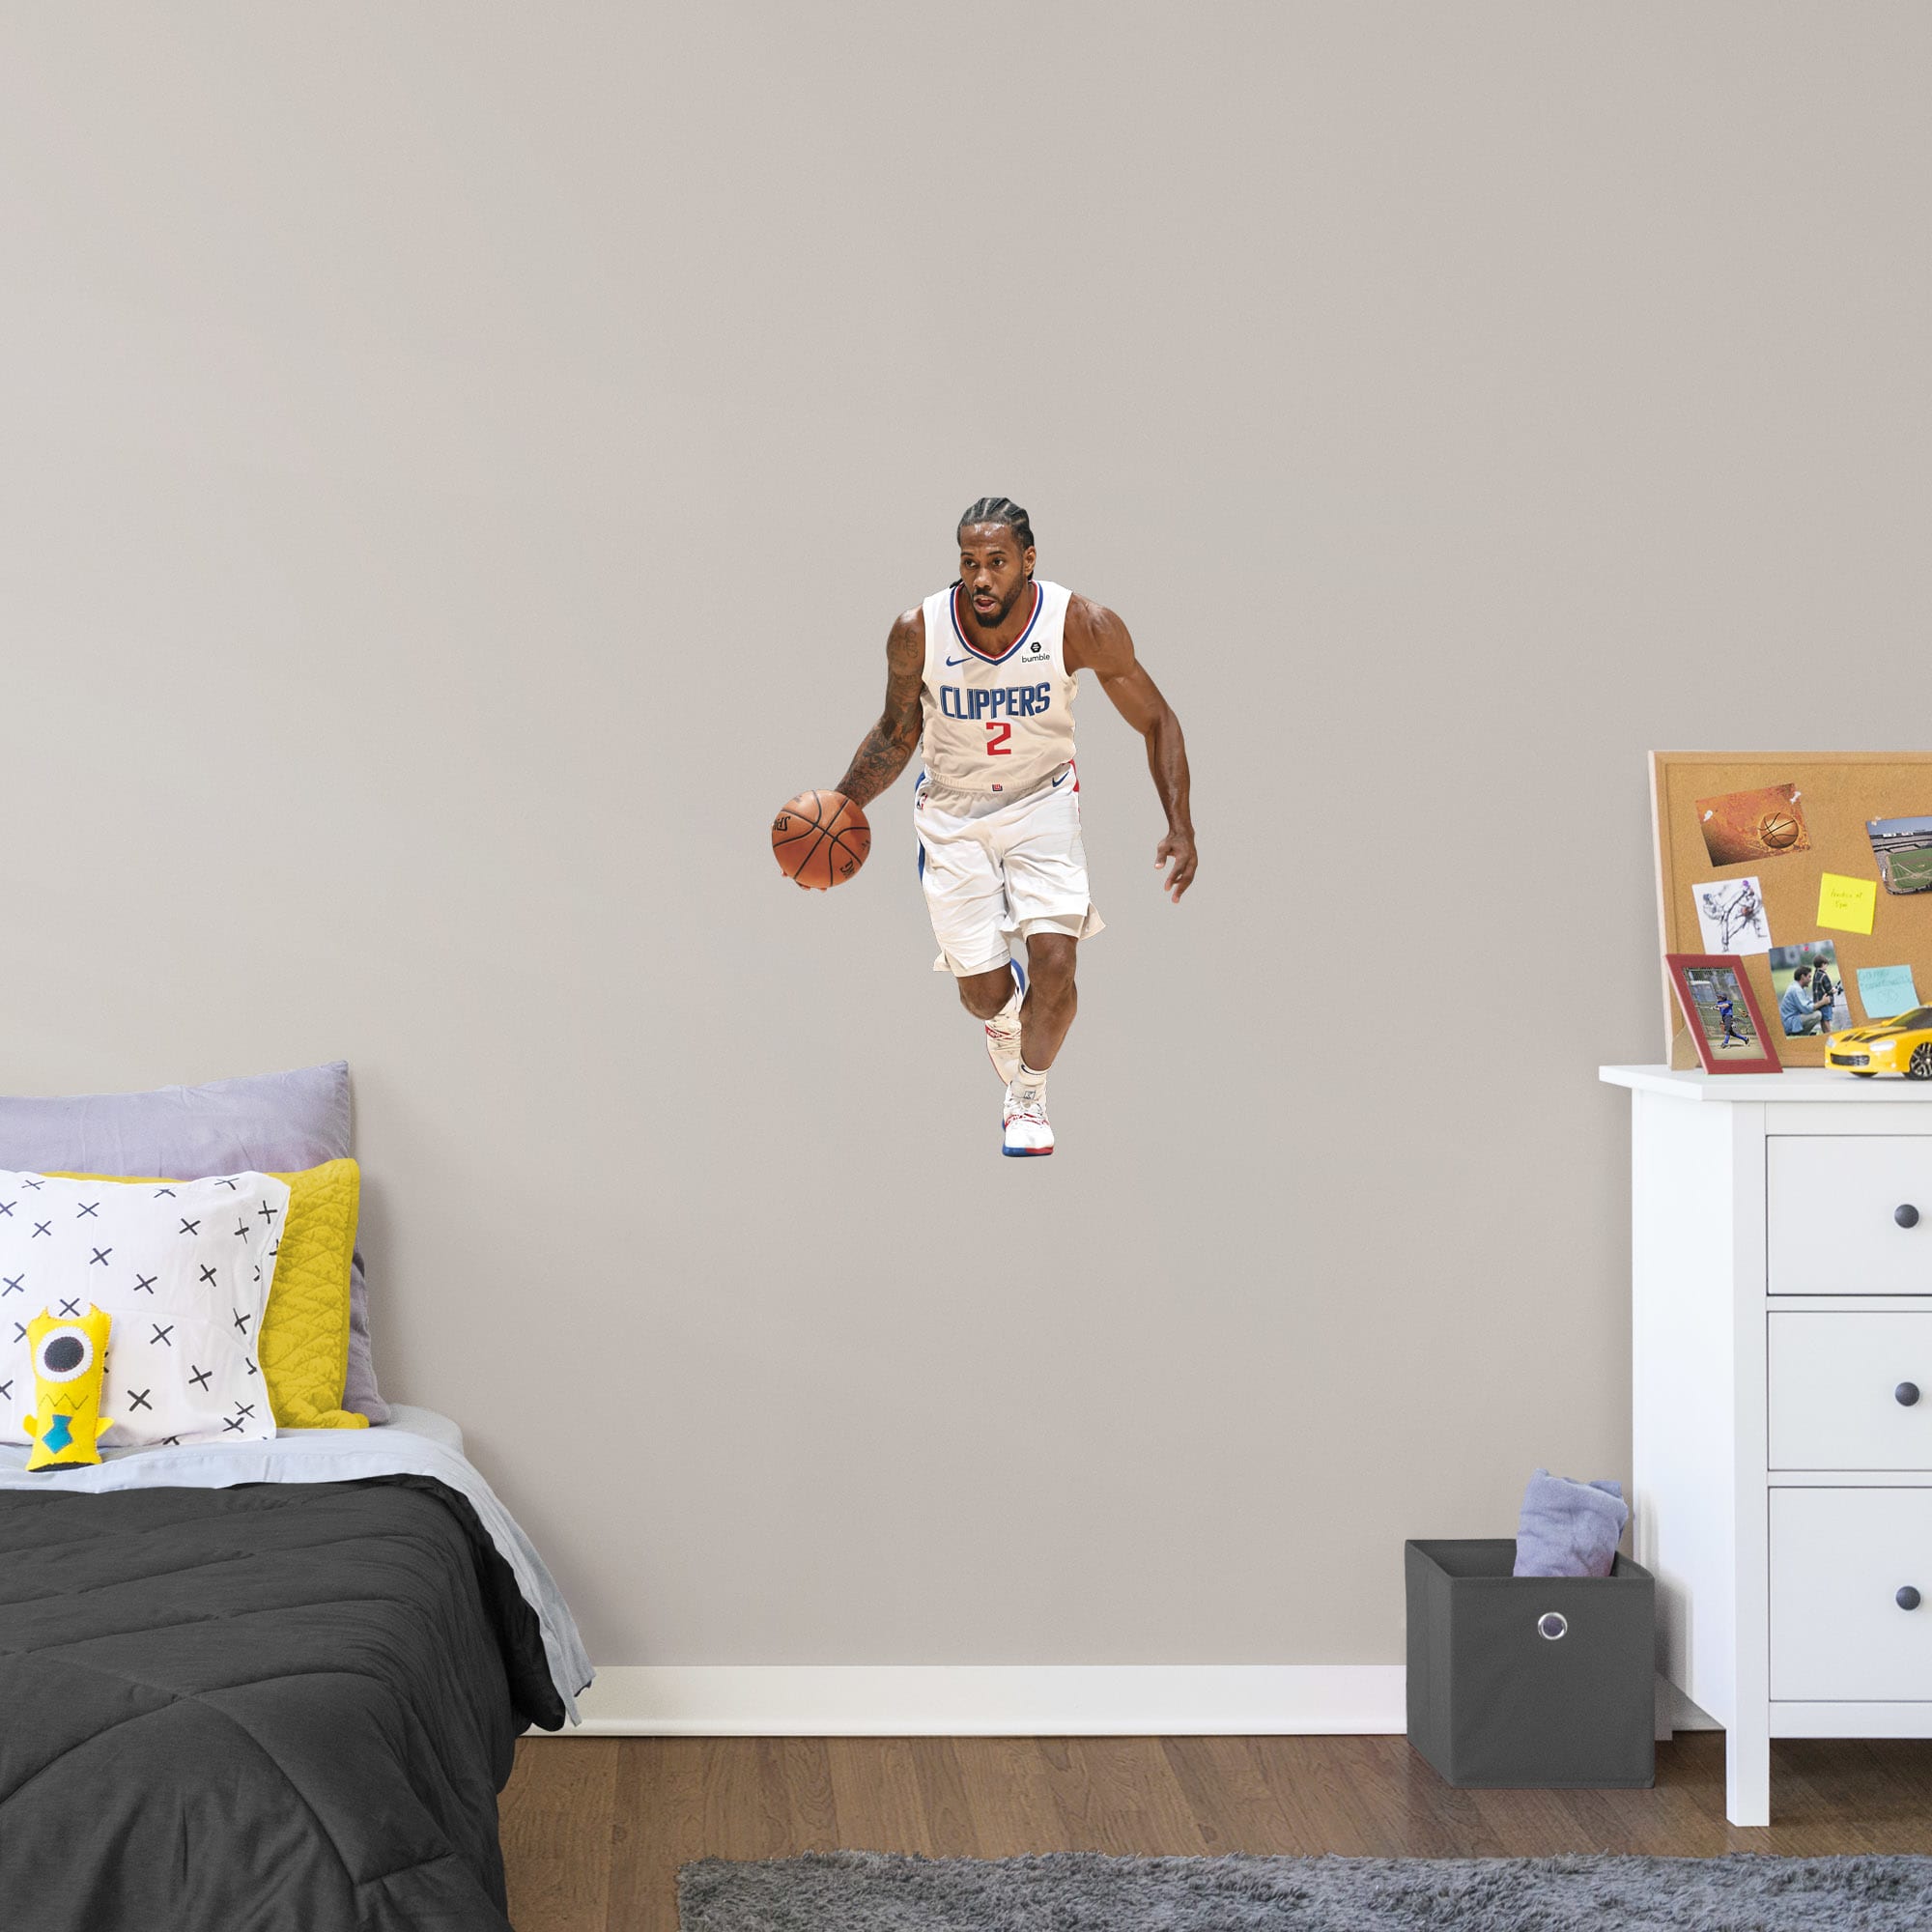 Kawhi Leonard for Los Angeles Clippers - Officially Licensed NBA Removable Wall Decal XL by Fathead | Vinyl